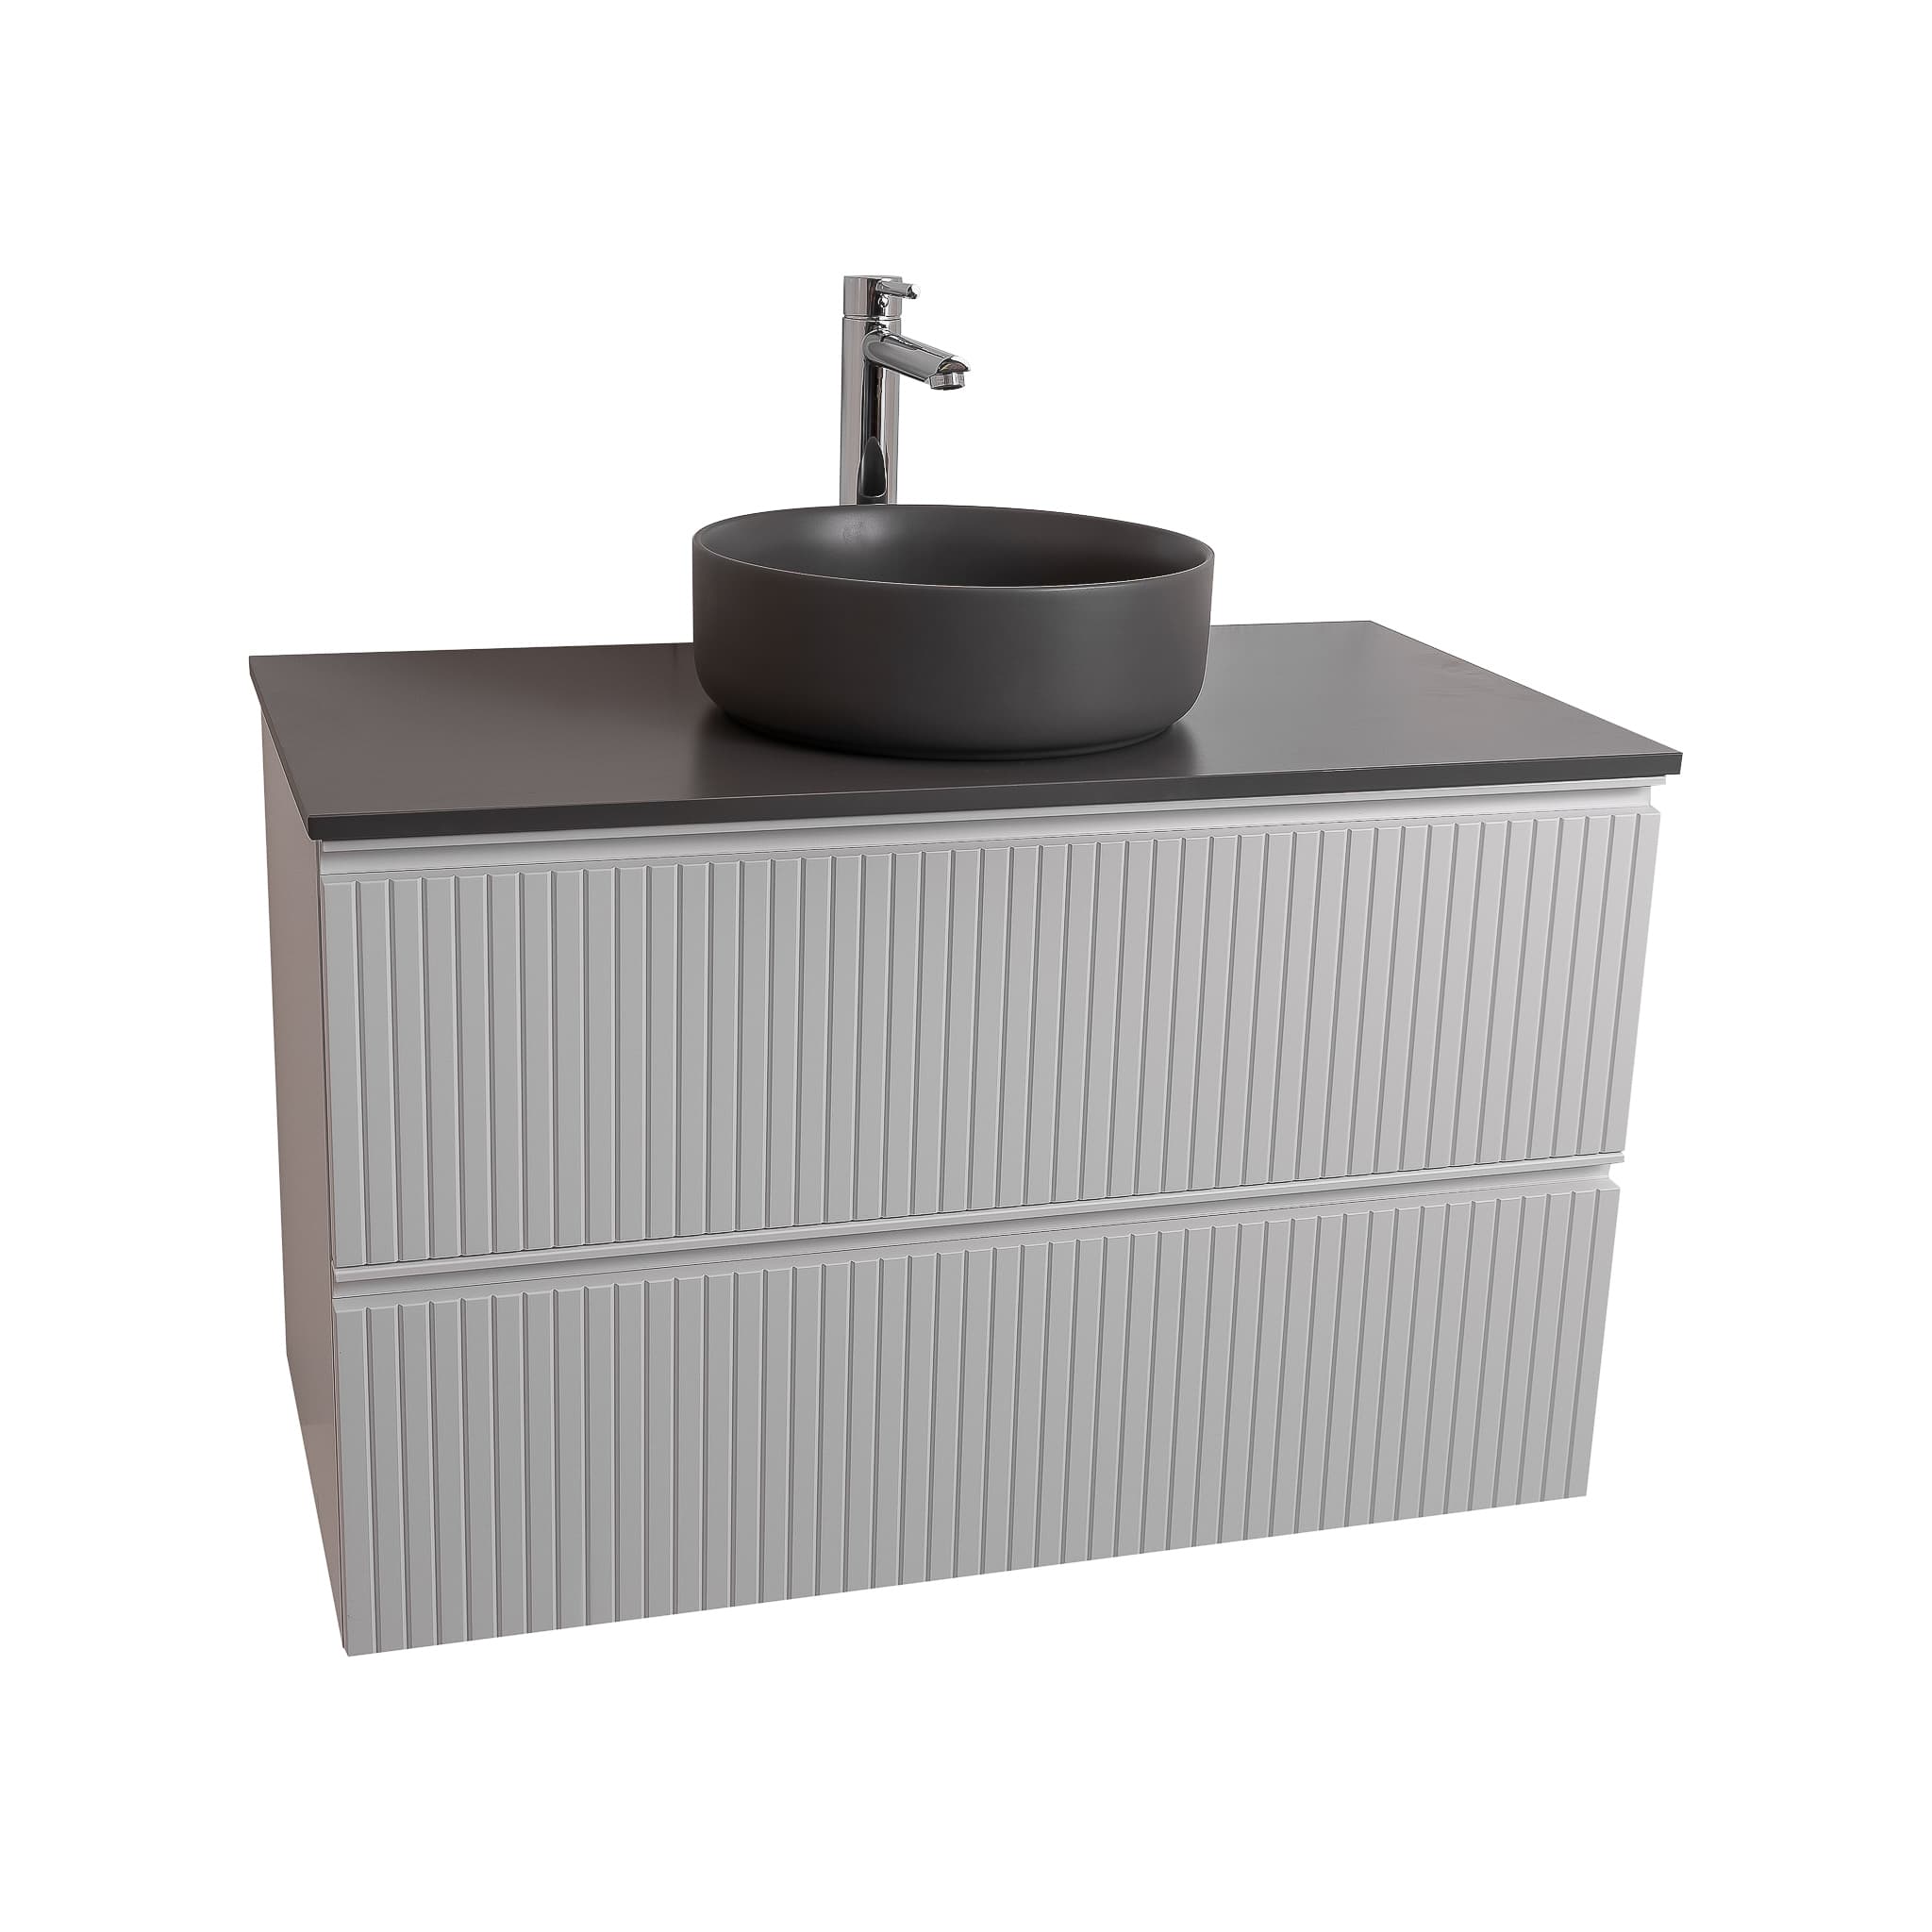 Ares 31.5 Matte White Cabinet, Ares Grey Ceniza Top And Ares Grey Ceniza Ceramic Basin, Wall Mounted Modern Vanity Set